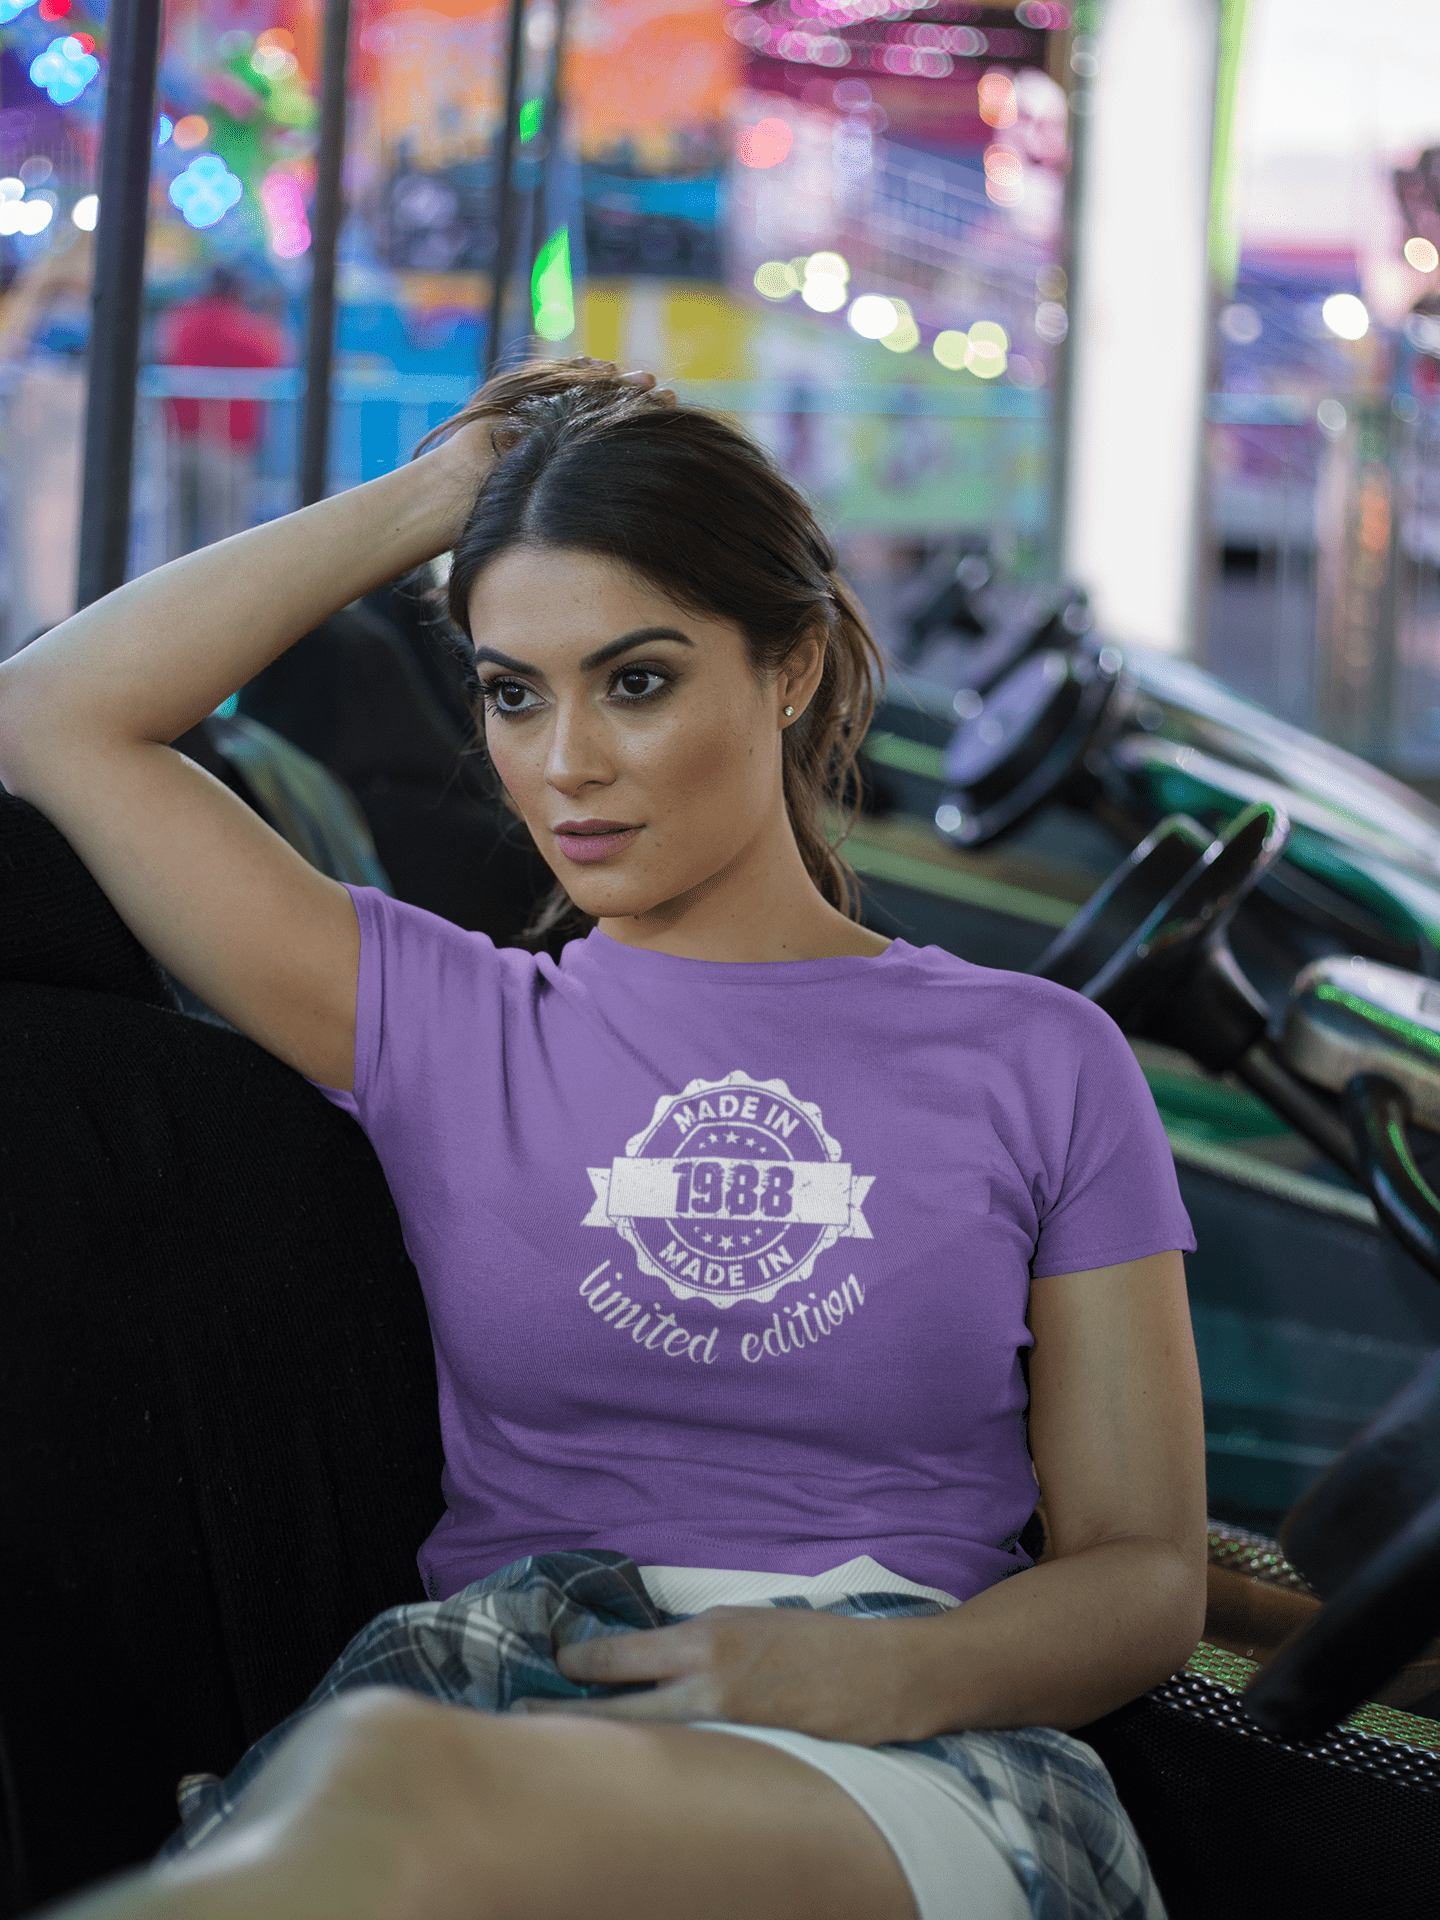 Made in 1988 Limited Edition Women's T-shirt Purple Birthday Gift 00428